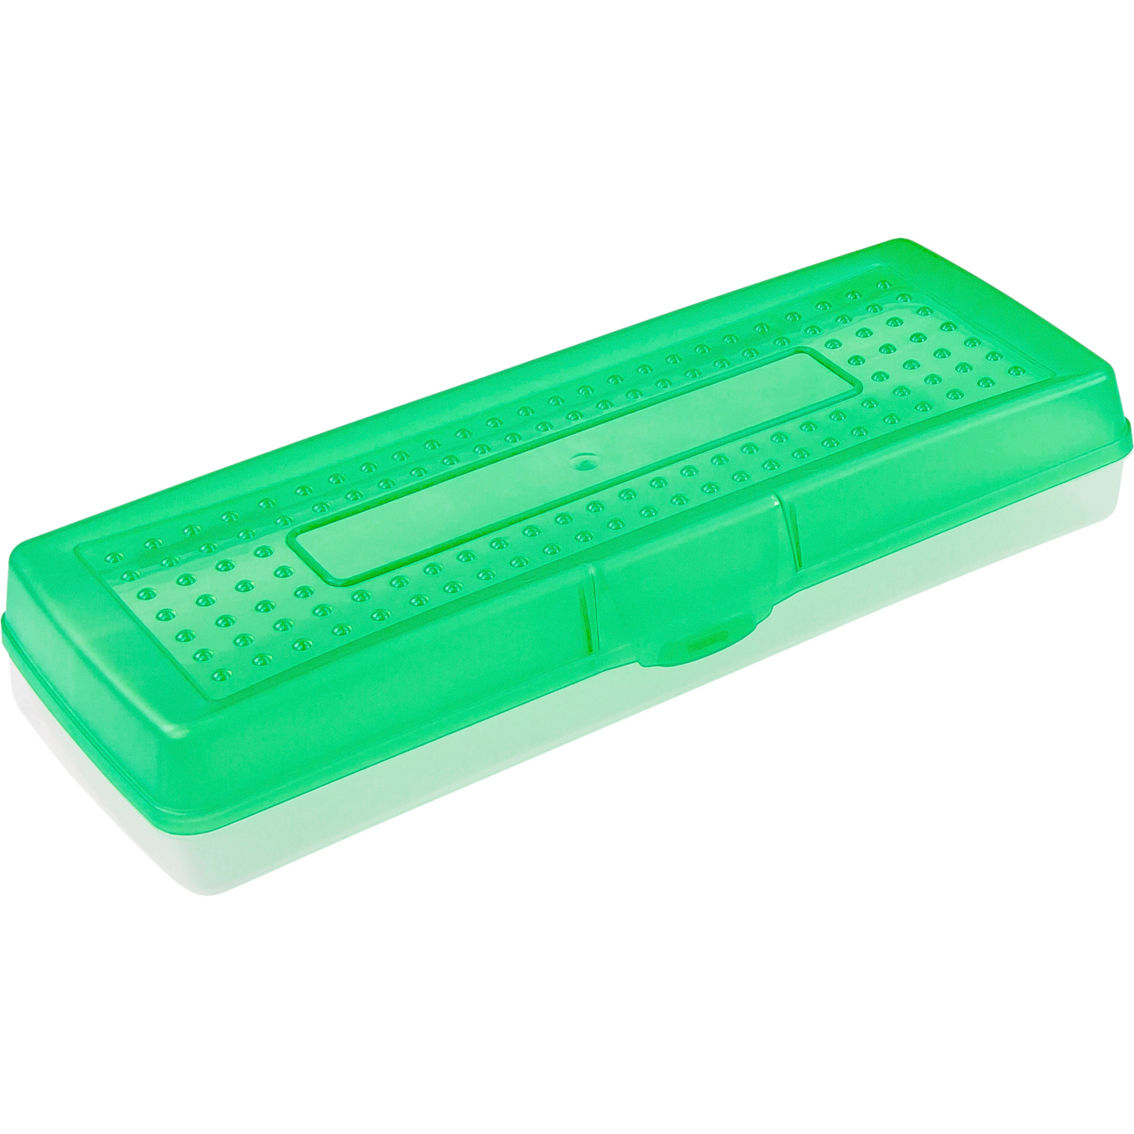 Storex Stretched Pencil Box 12 ct. Case - Image 4 of 6